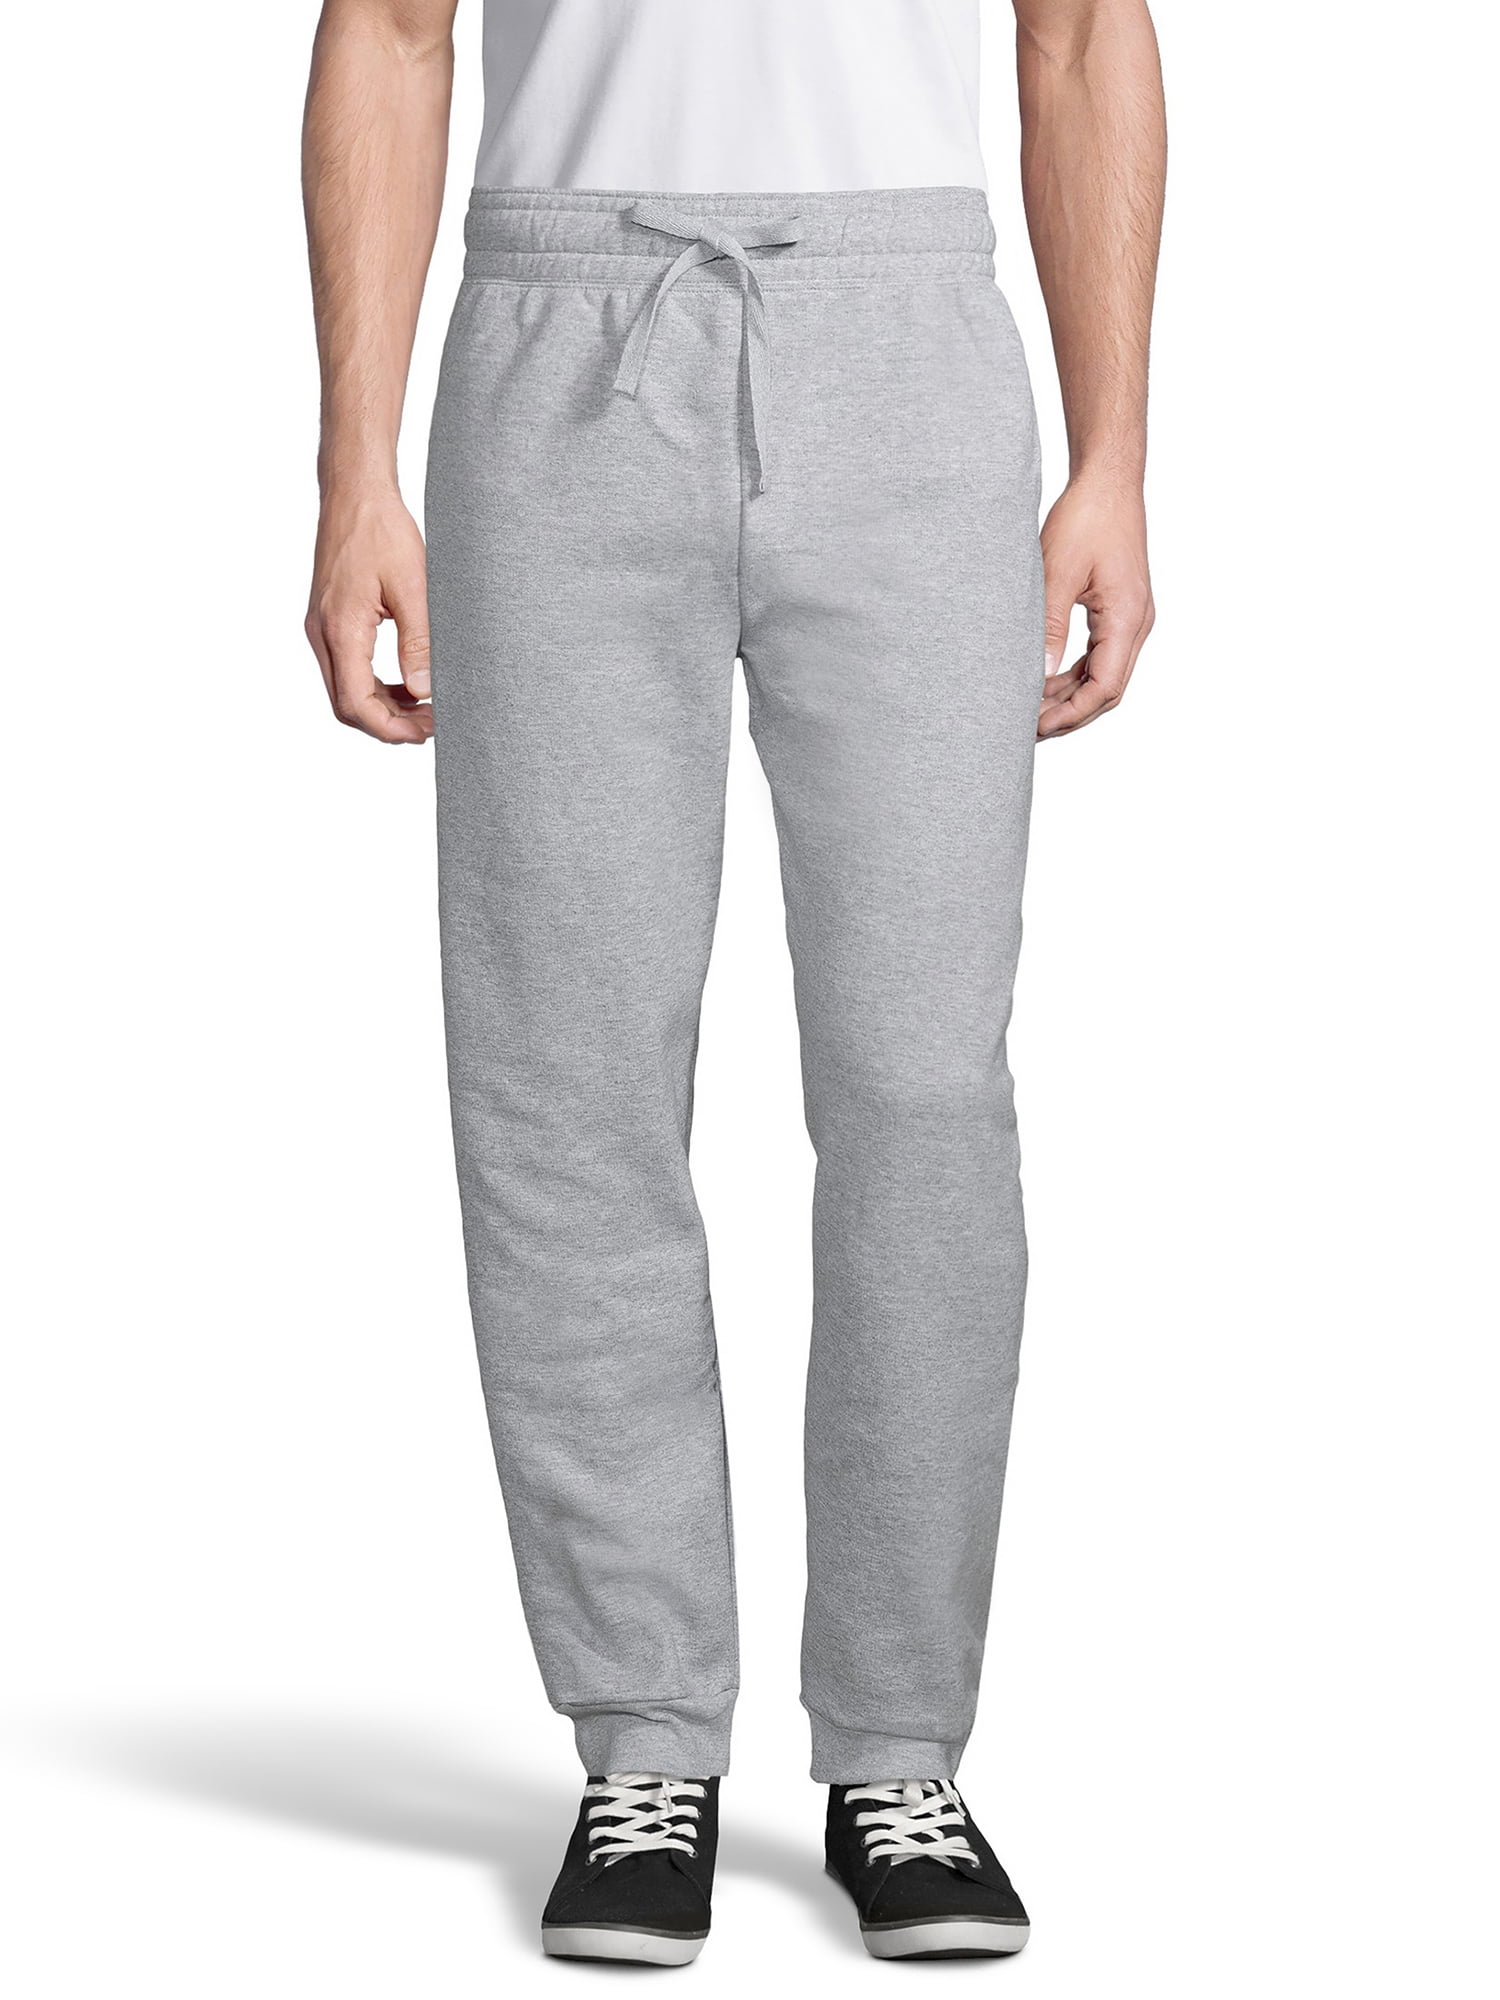 The Hanes EcoSmart Sweatpants are on sale at  for Presidents' Day 2022